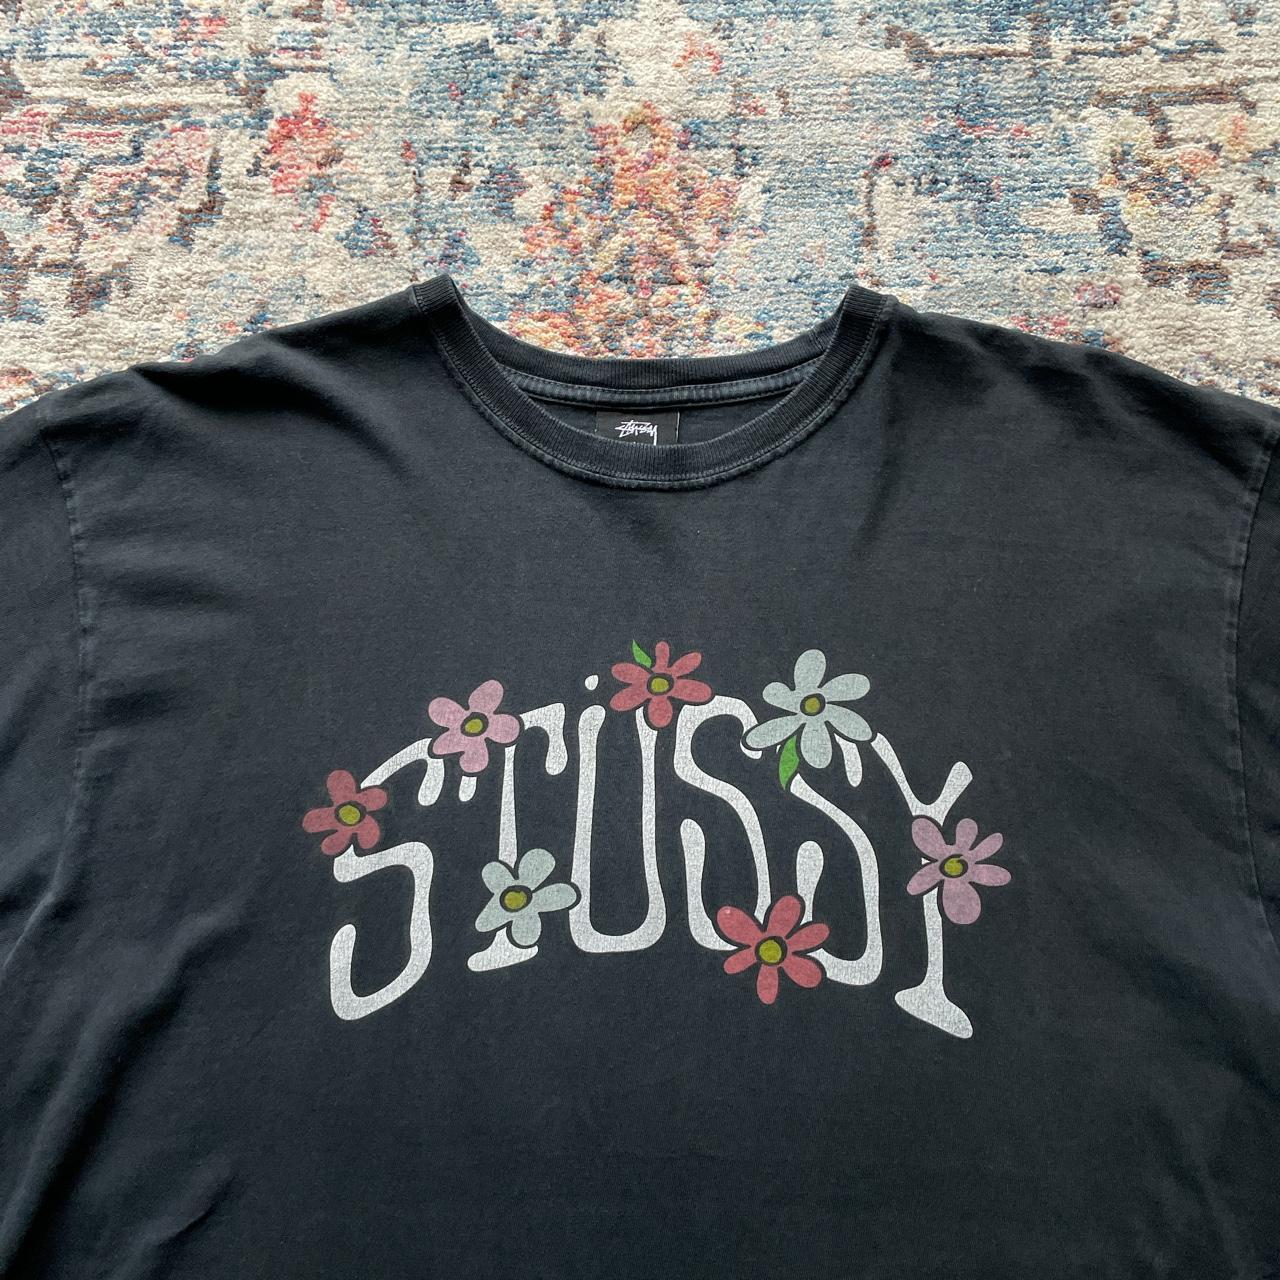 Stussy Black Spell Out T-Shirt